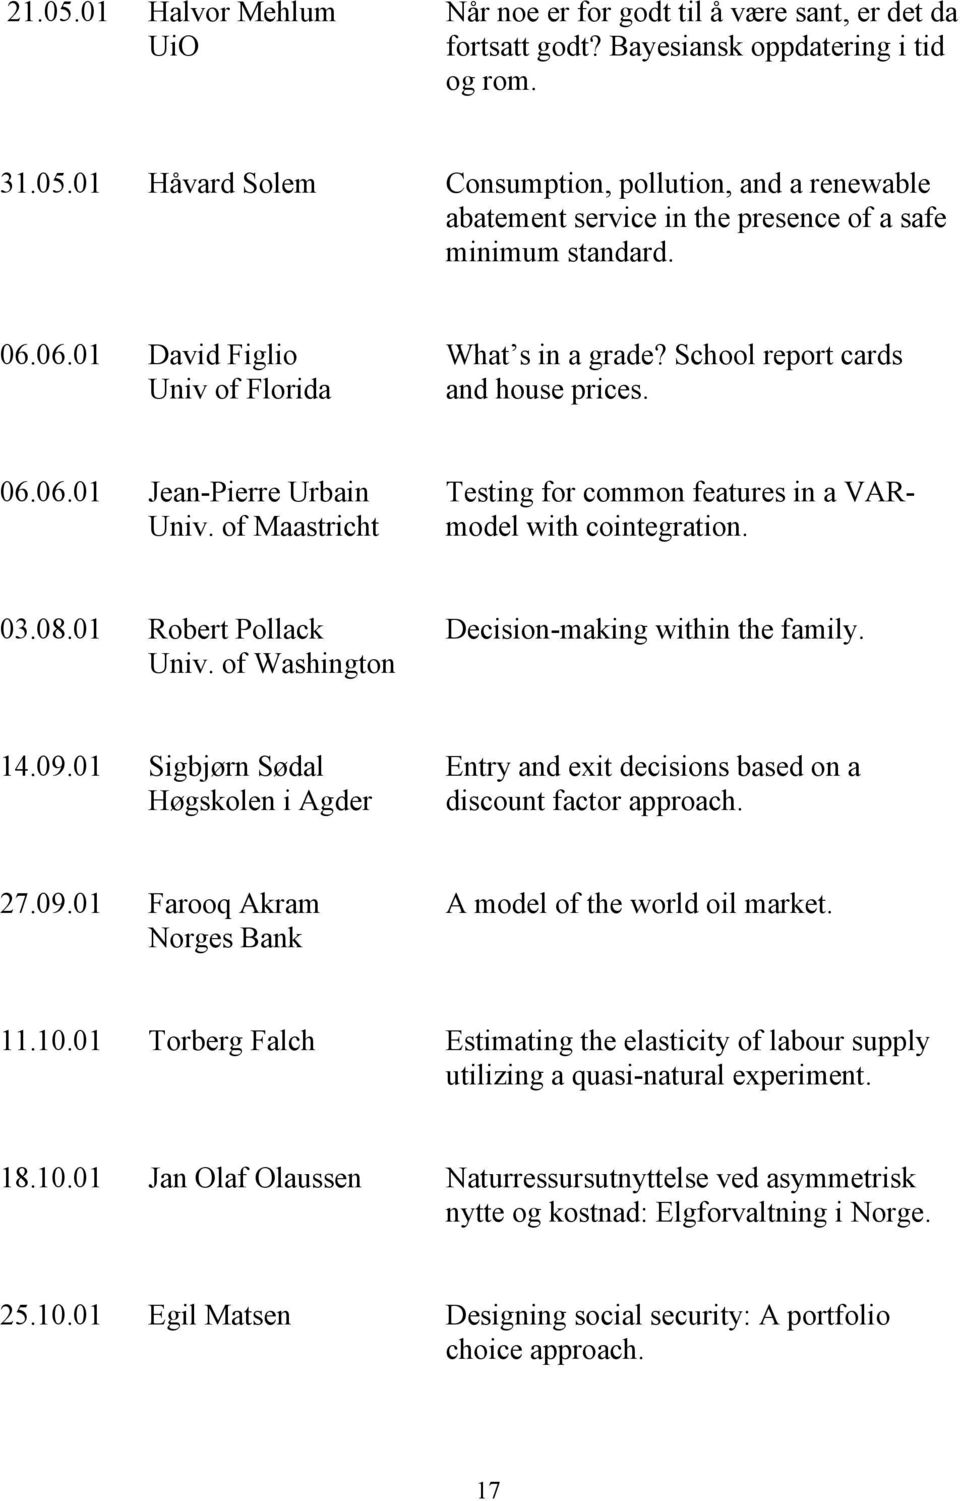 of Maastricht model with cointegration. 03.08.01 Robert Pollack Decision-making within the family. Univ. of Washington 14.09.